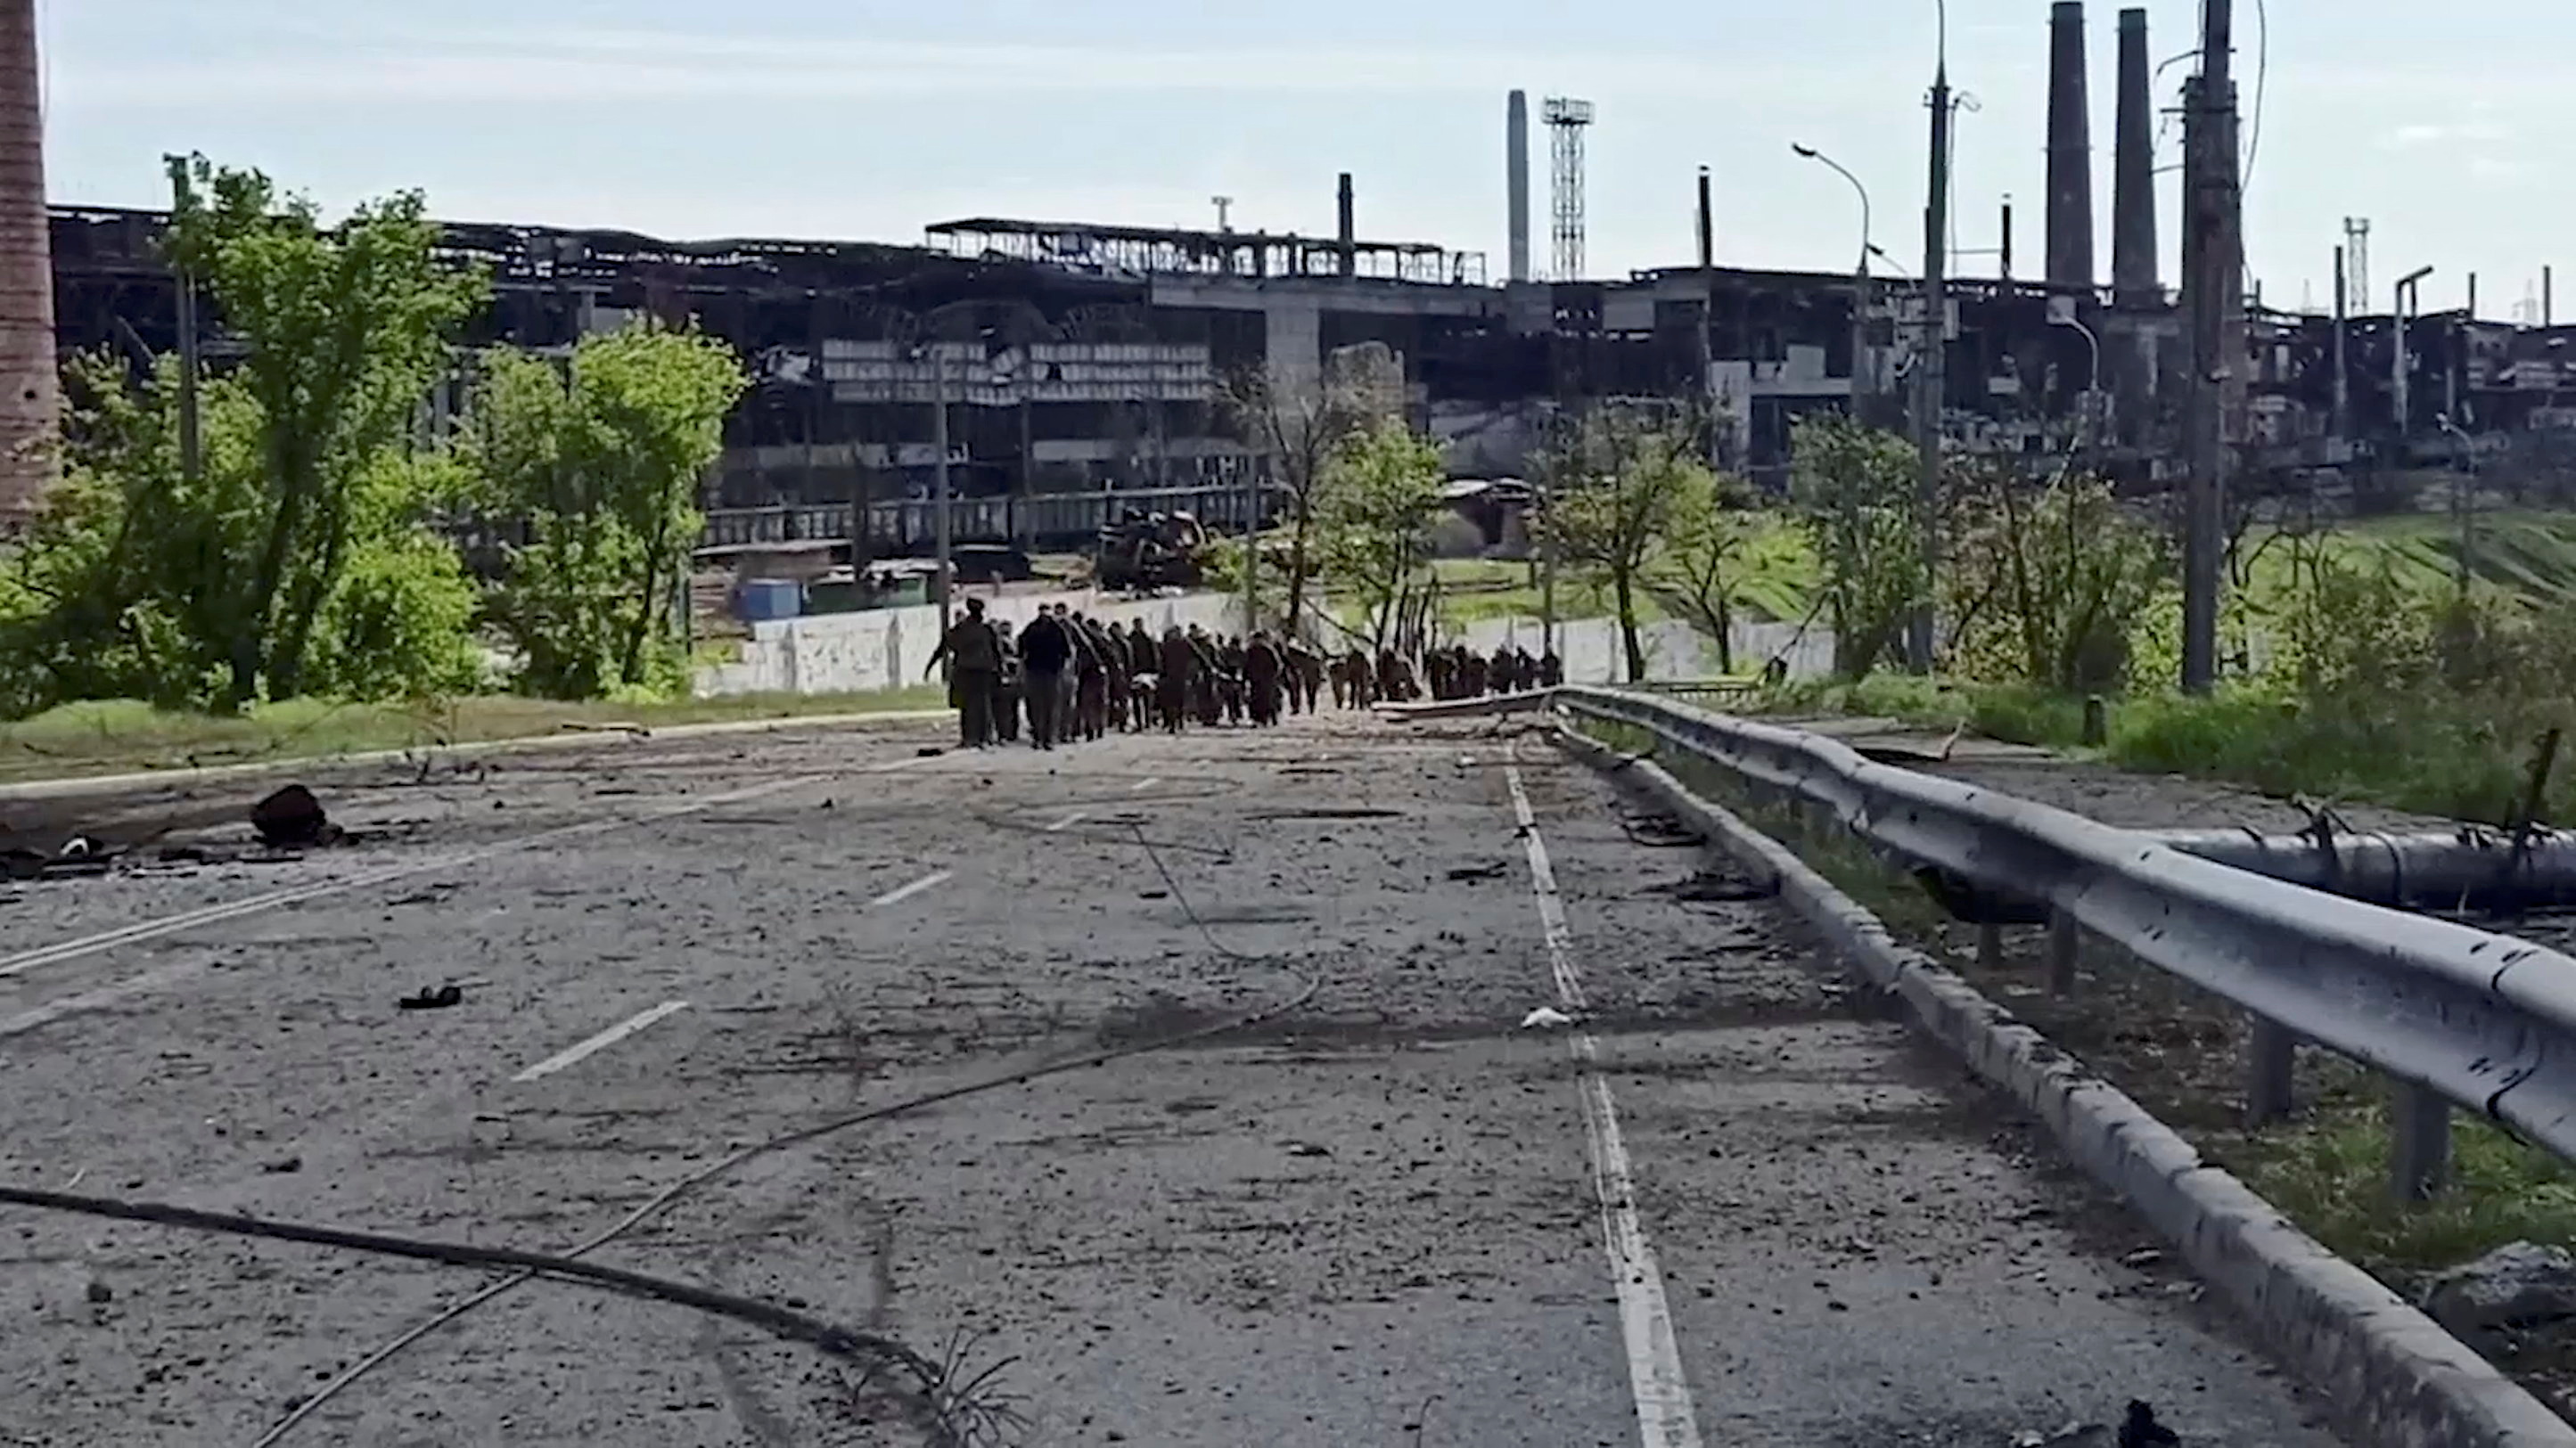 Service members of Ukrainian forces who have surrendered after weeks holed up at Azovstal steel works leave the territory of the plant in Mariupol